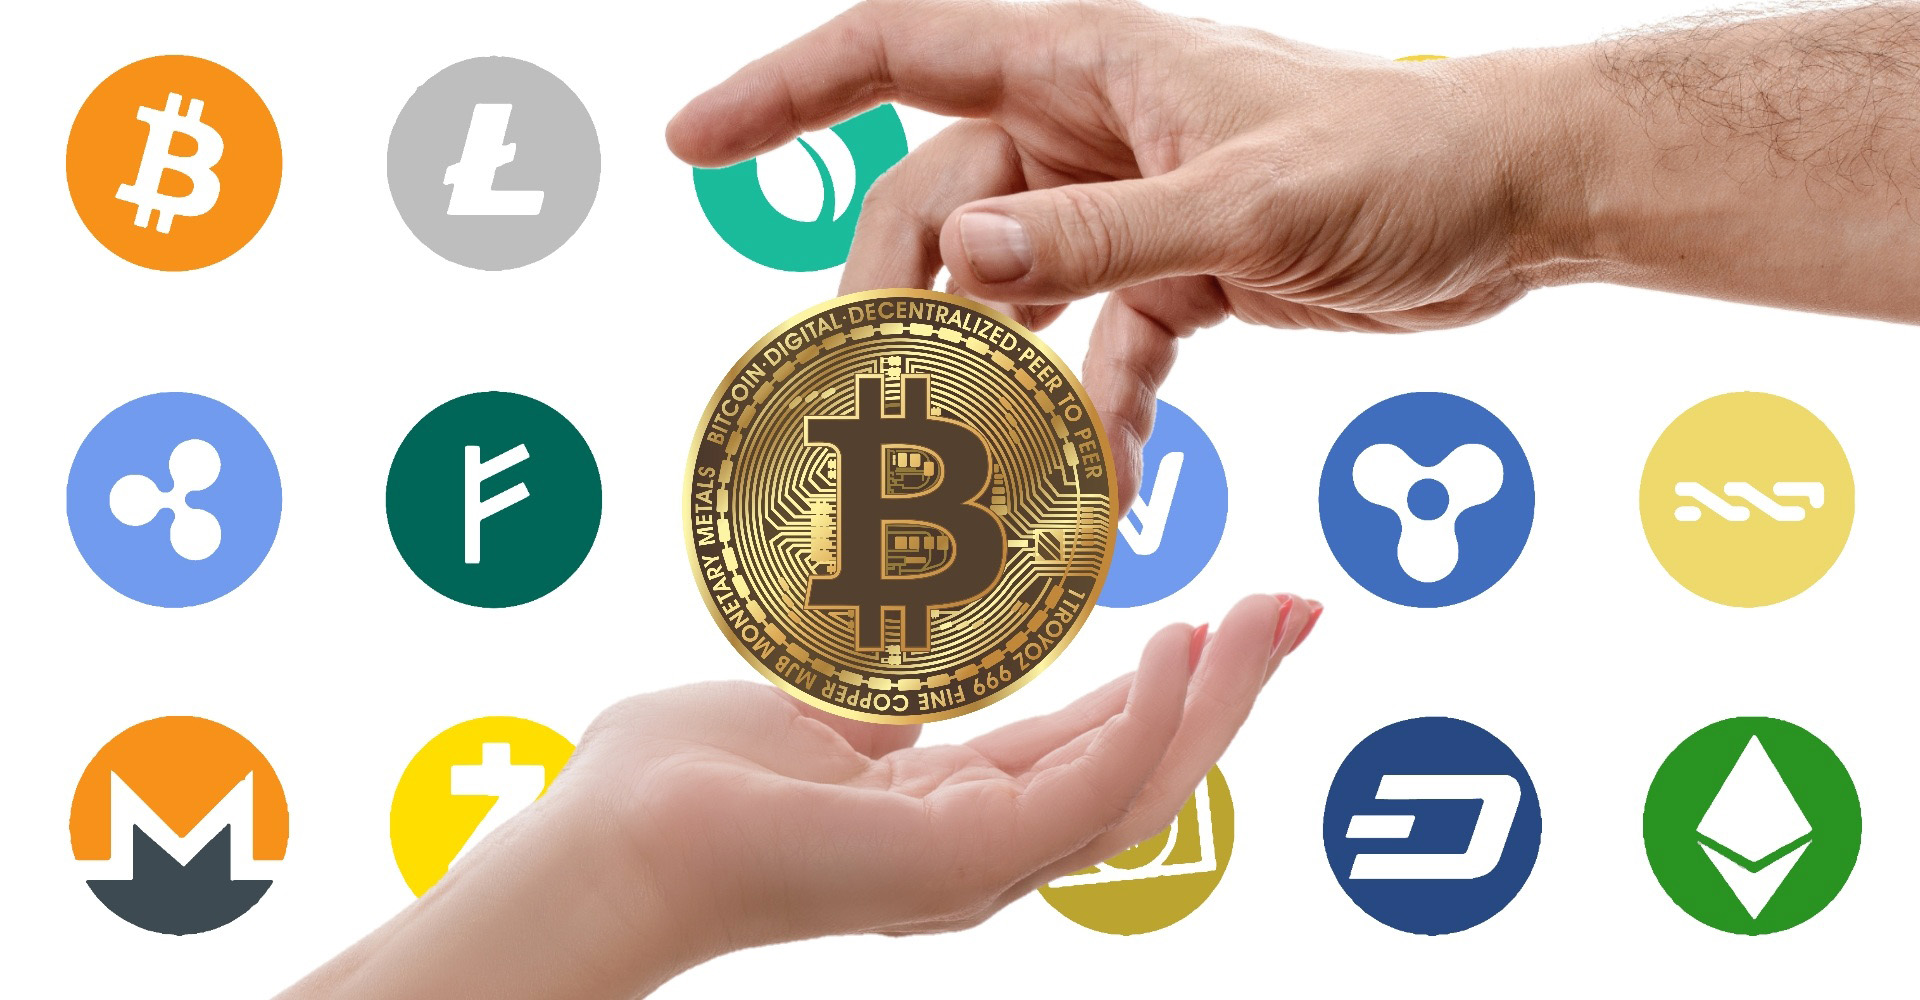 Bitcoin and other cryptocurrency exchange image - Free stock photo - Public Domain photo - CC0 Images